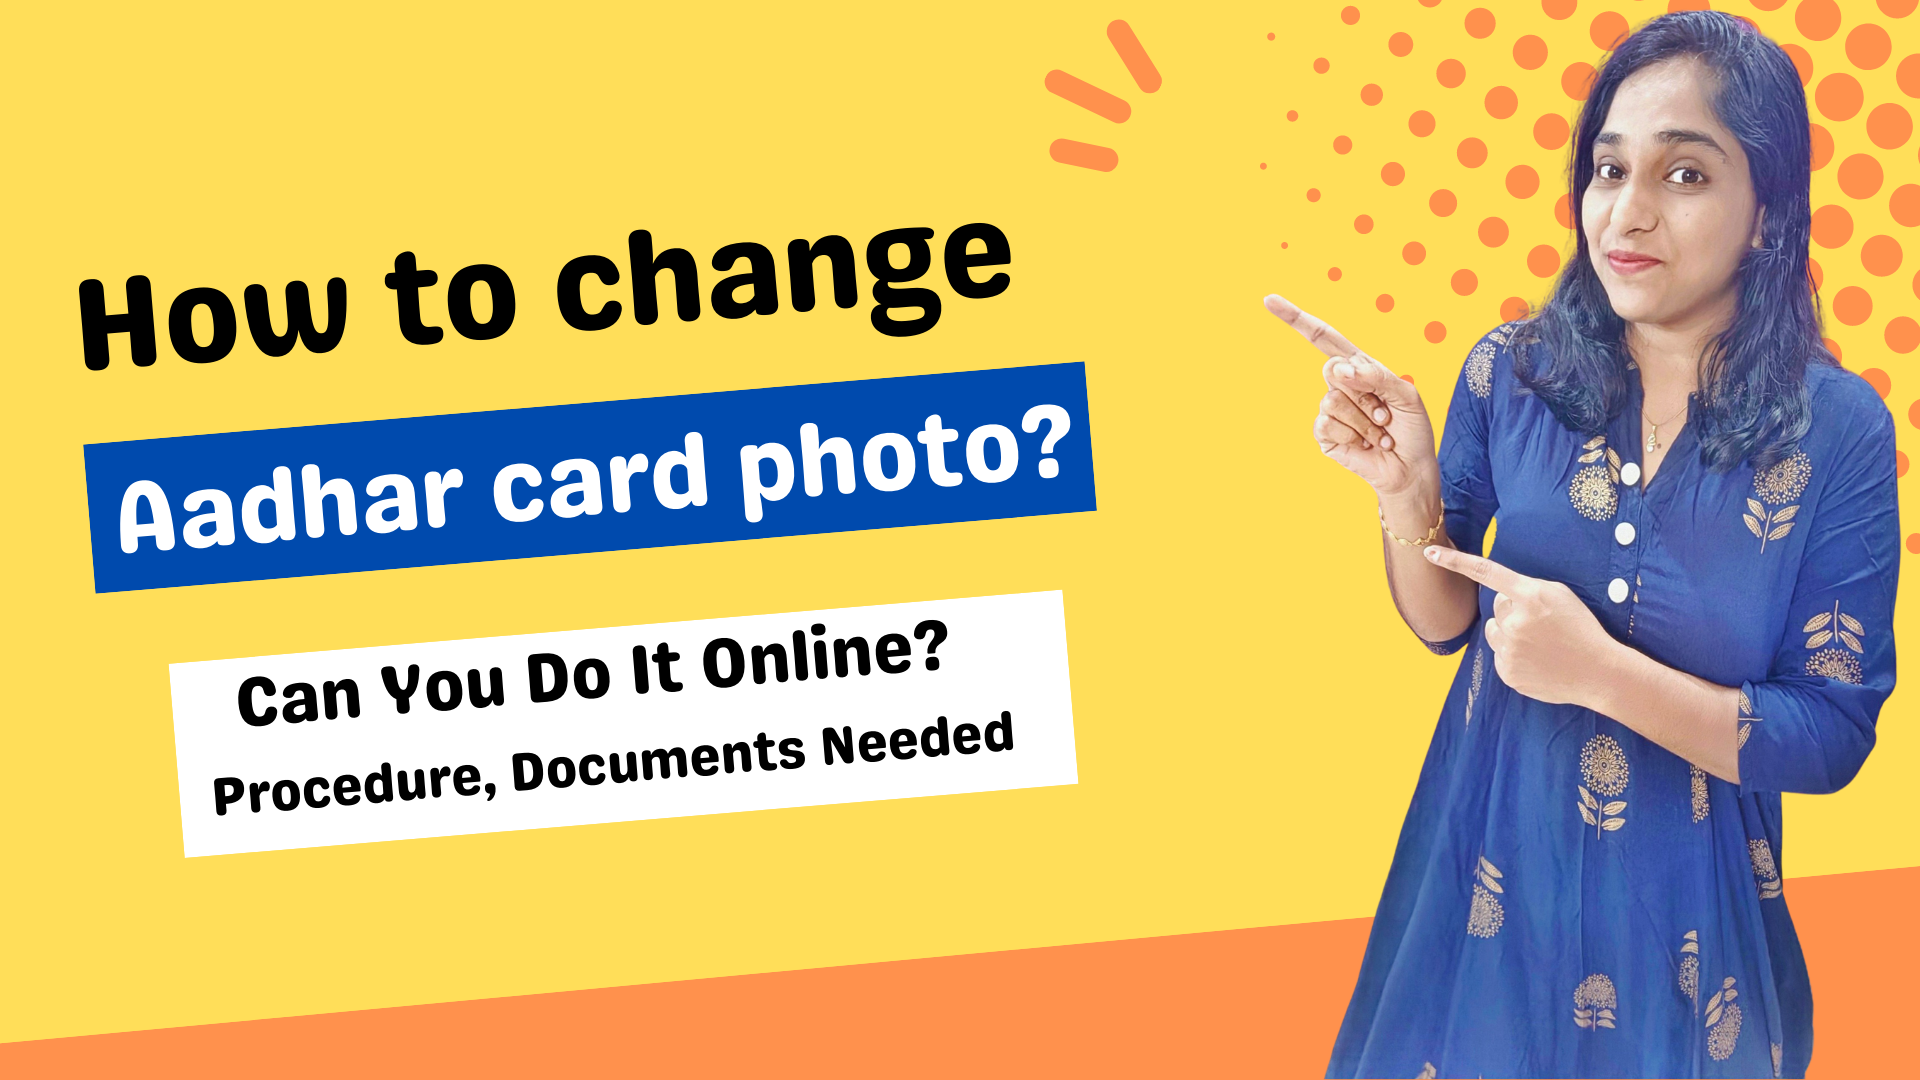 How To Change Your Aadhar Card Photo? Can You Do It Online? Procedure, Documents Needed